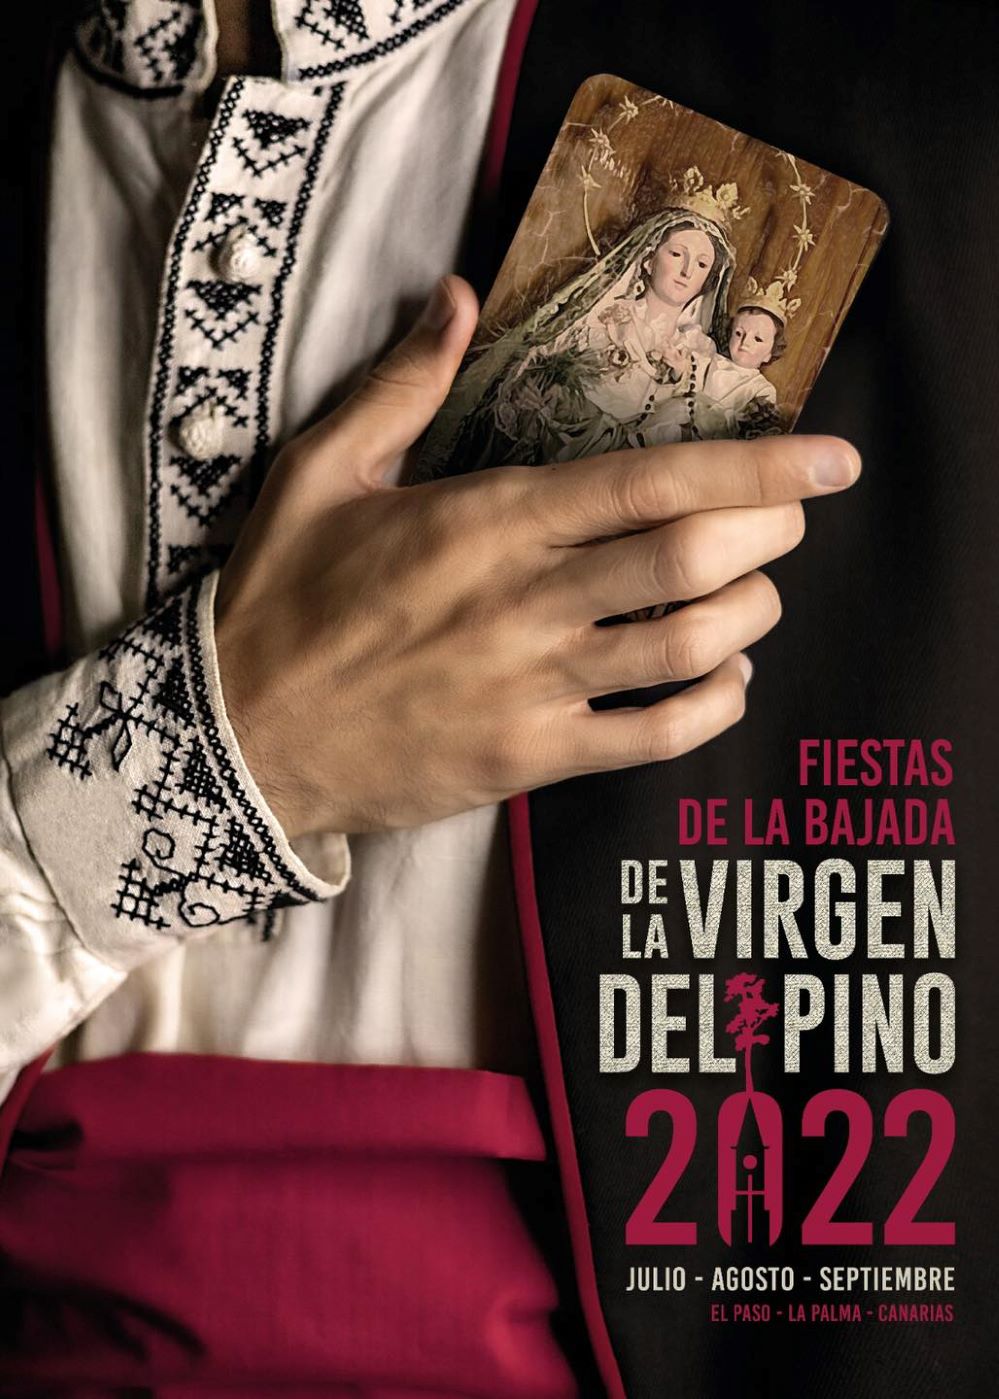 The tradition of the Descent of the Virgin of El Pino features in its announcement poster